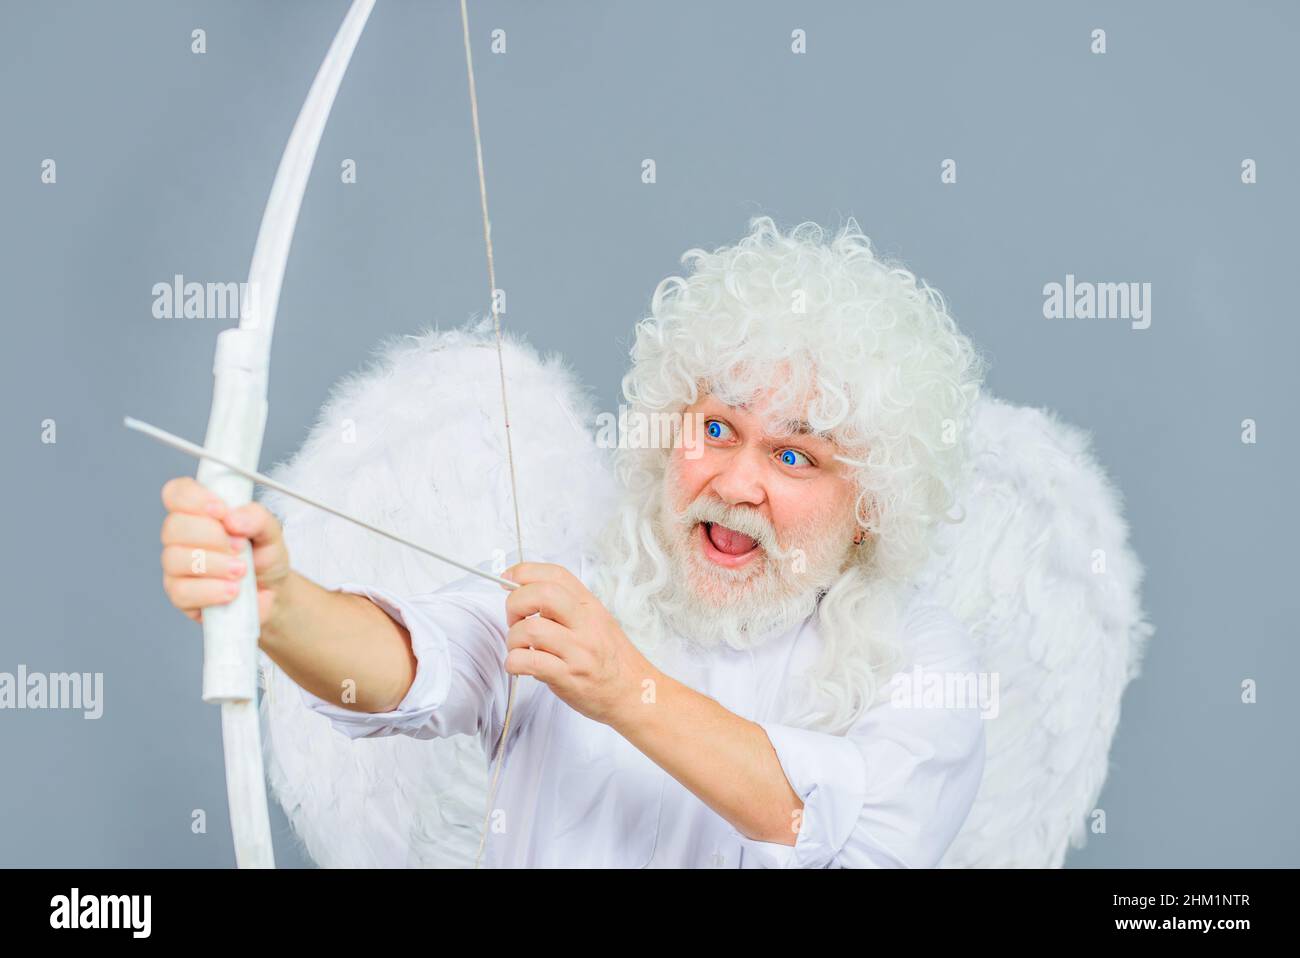 Valentines Day. Funny cupid aiming with bow and arrow. Angel with wings and white wig. Saint valentine. Stock Photo